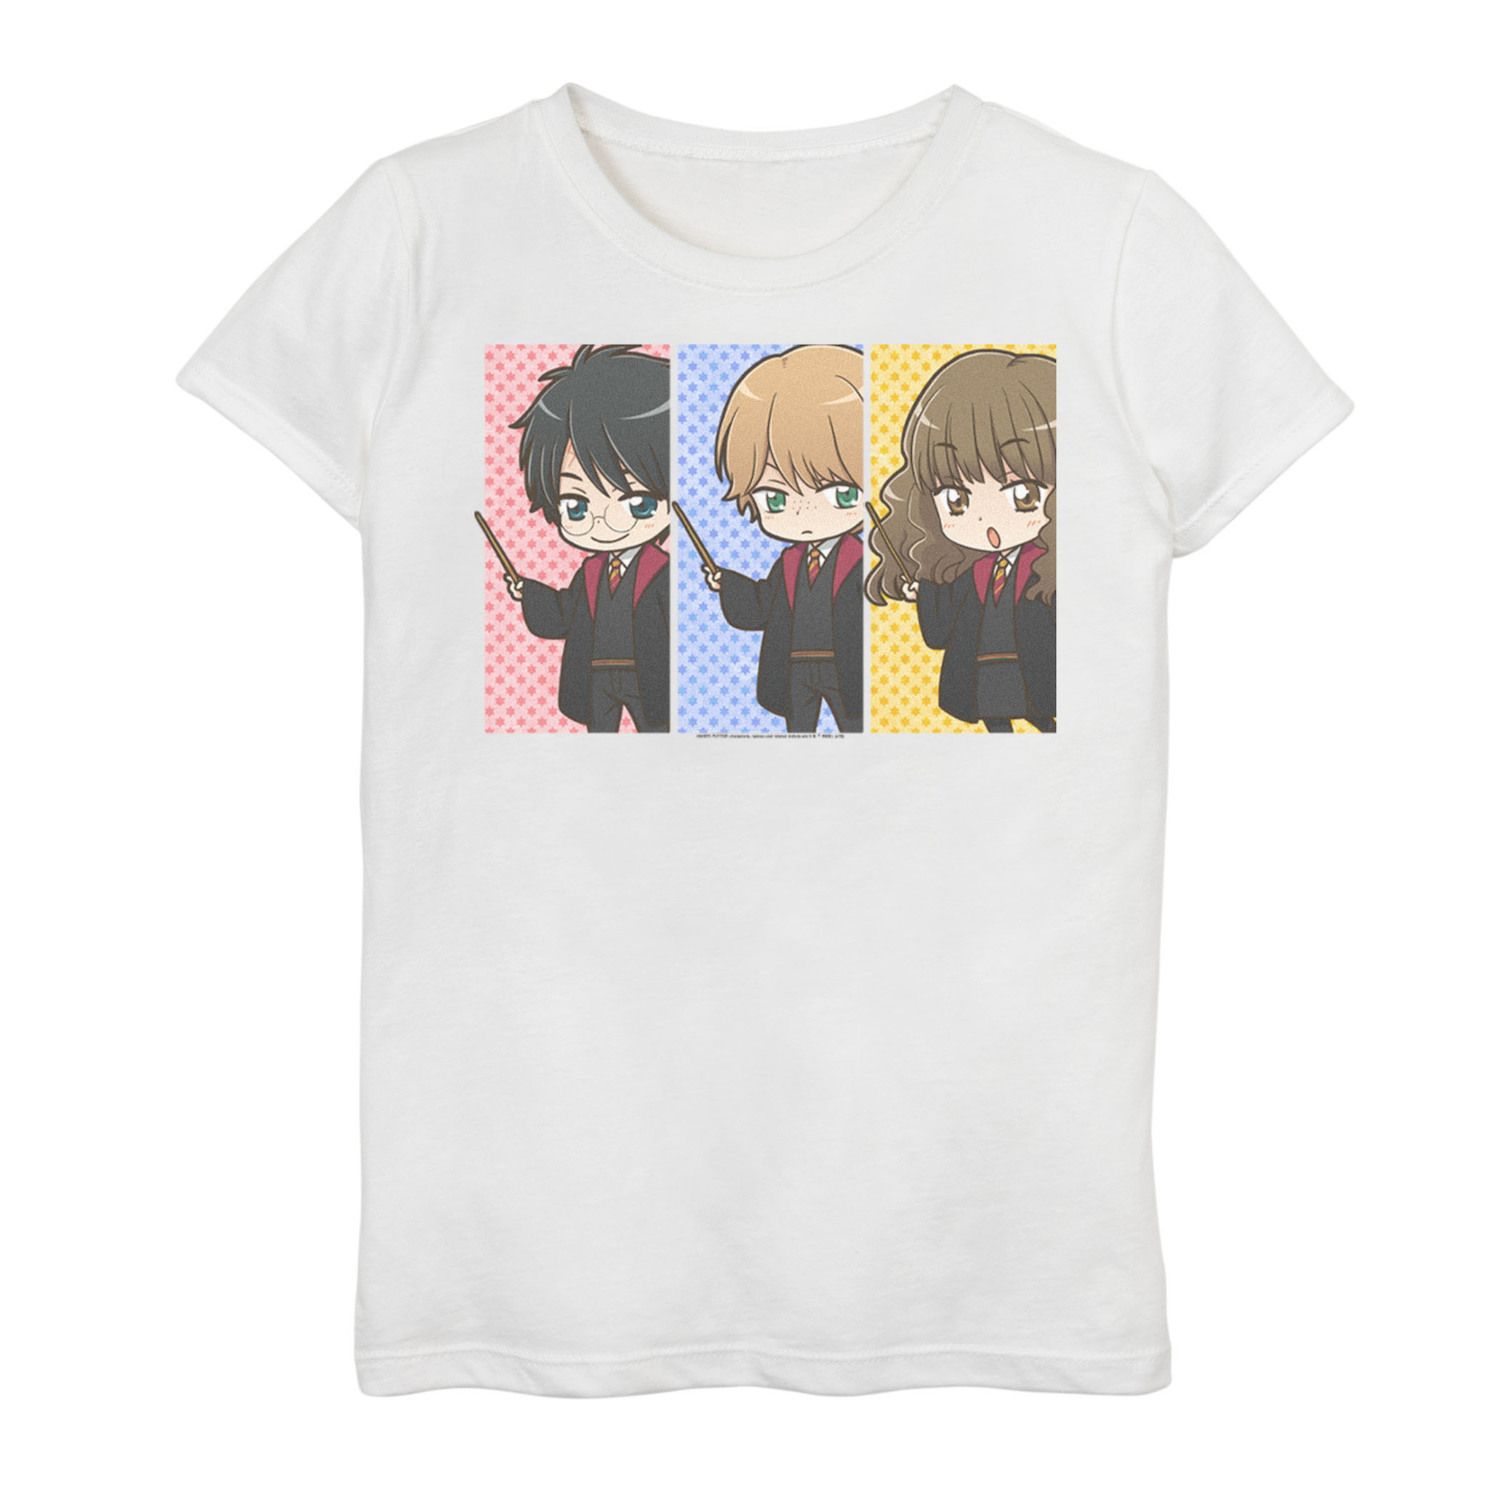 Image for Harry Potter Girls 7-16 Hermione Granger Ron Weasley Anime Panel Graphic Tee at Kohl's.